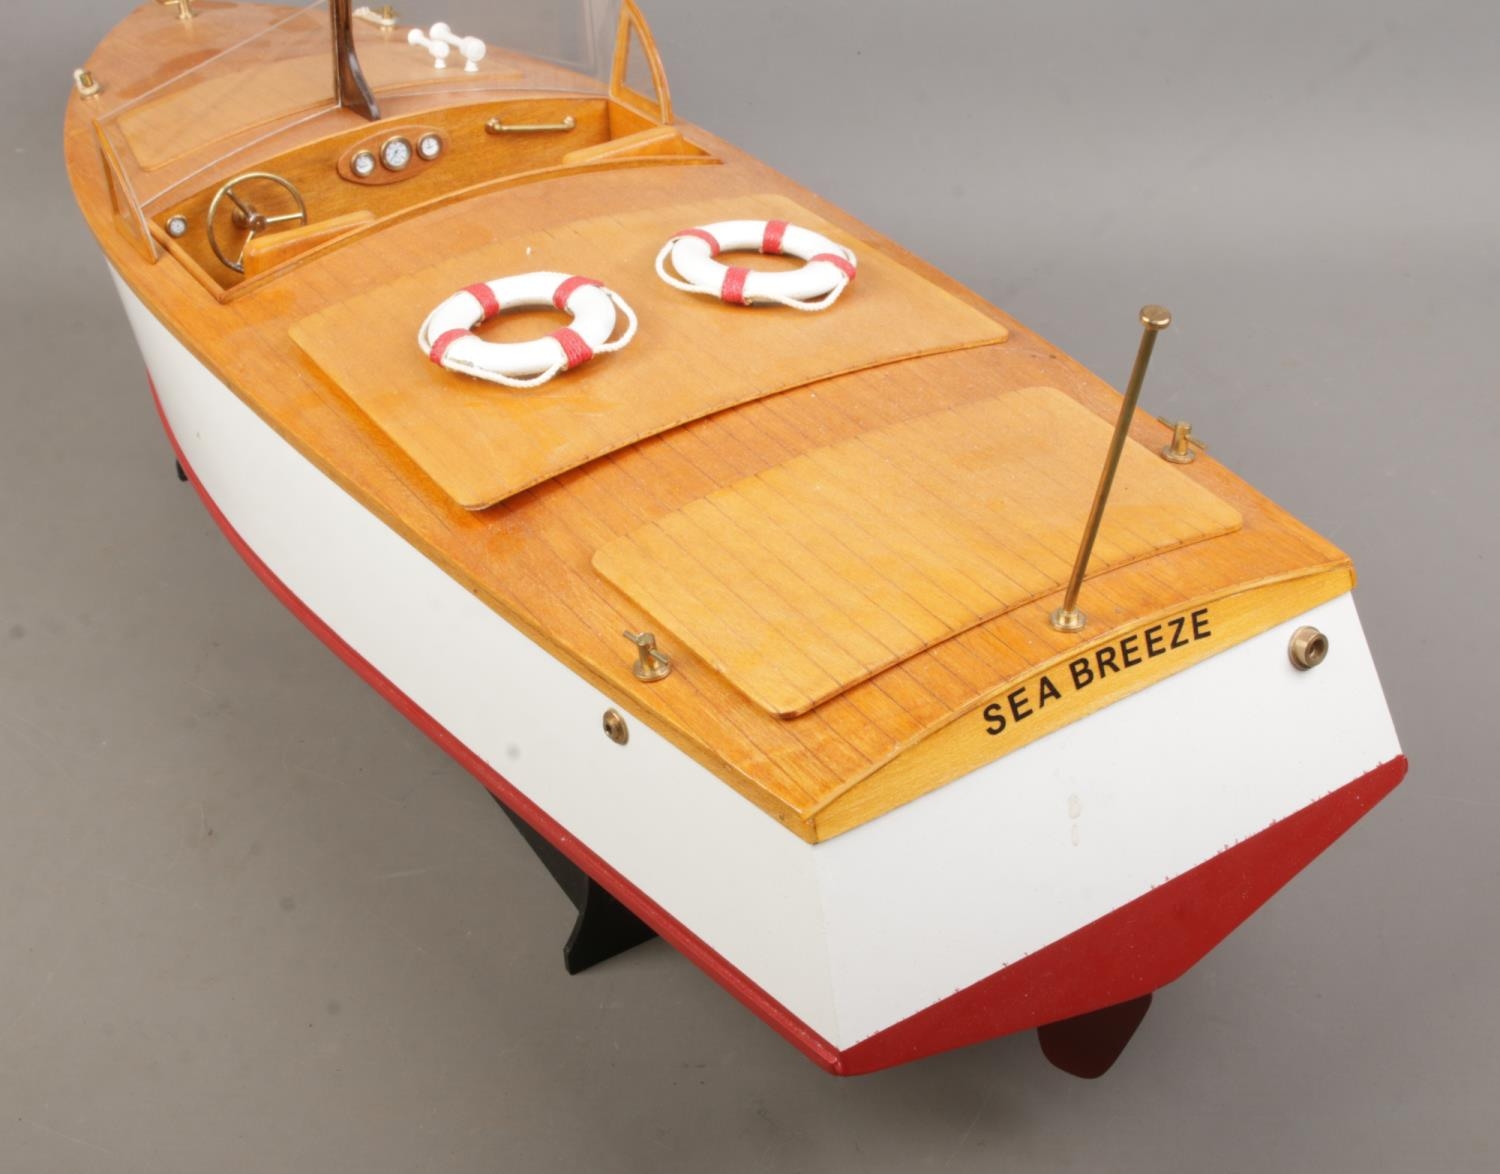 A motorised pond cruiser titled Sea Breeze on display stand. Approx. boat length 60cm. - Image 2 of 3